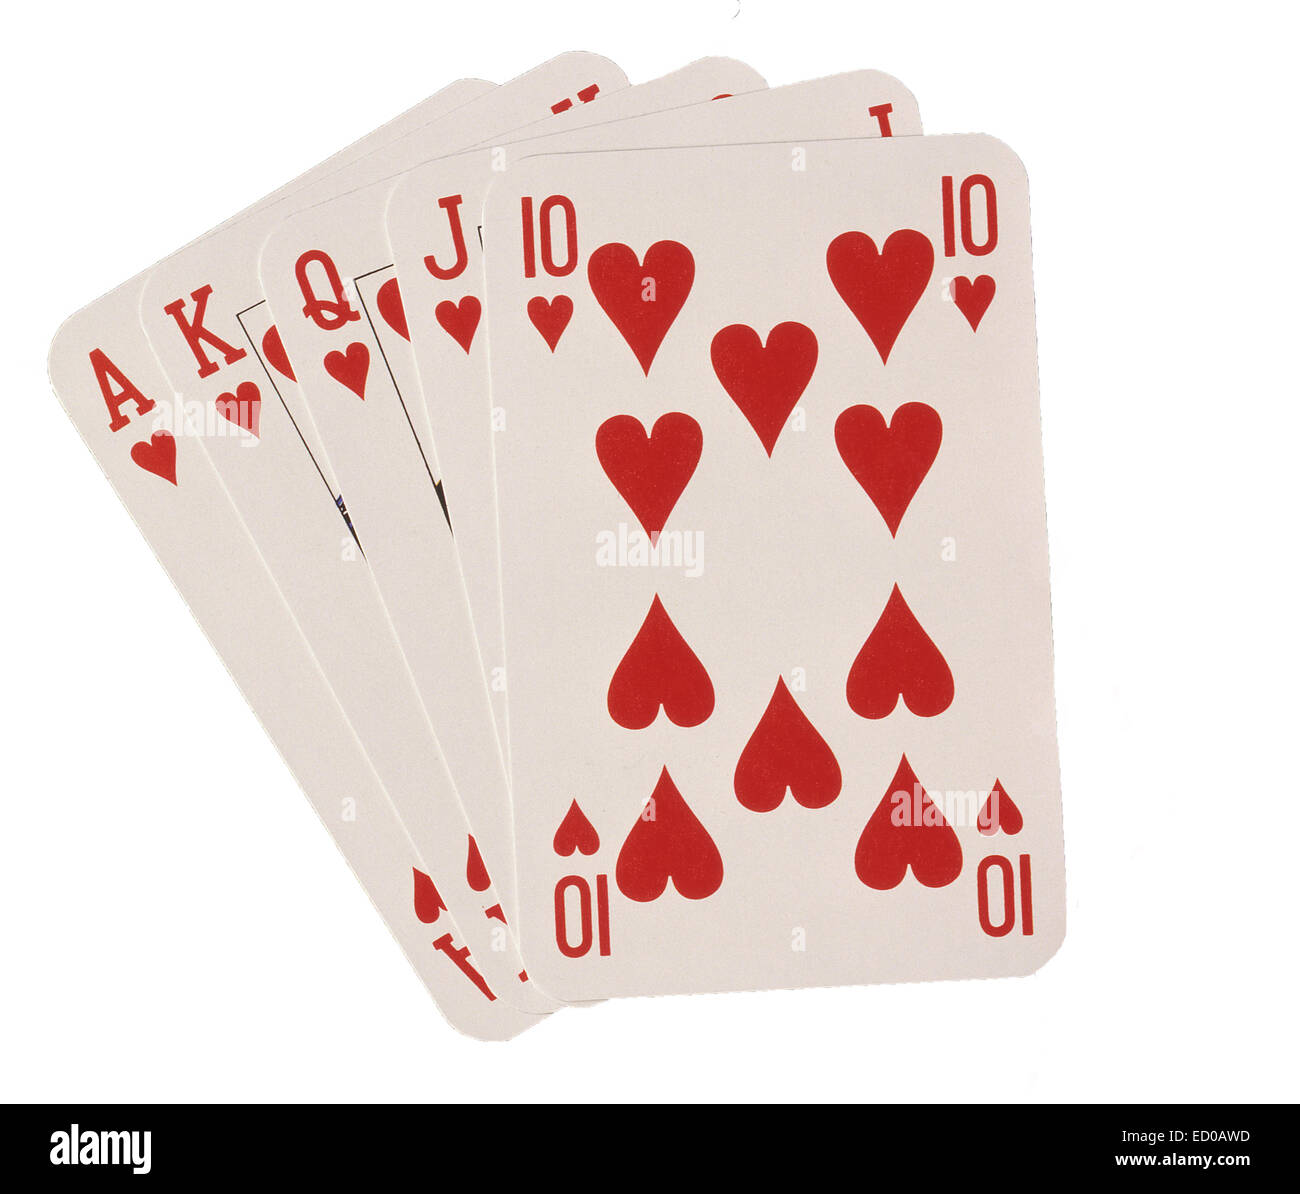 Selection of heart suite playing cards Stock Photo